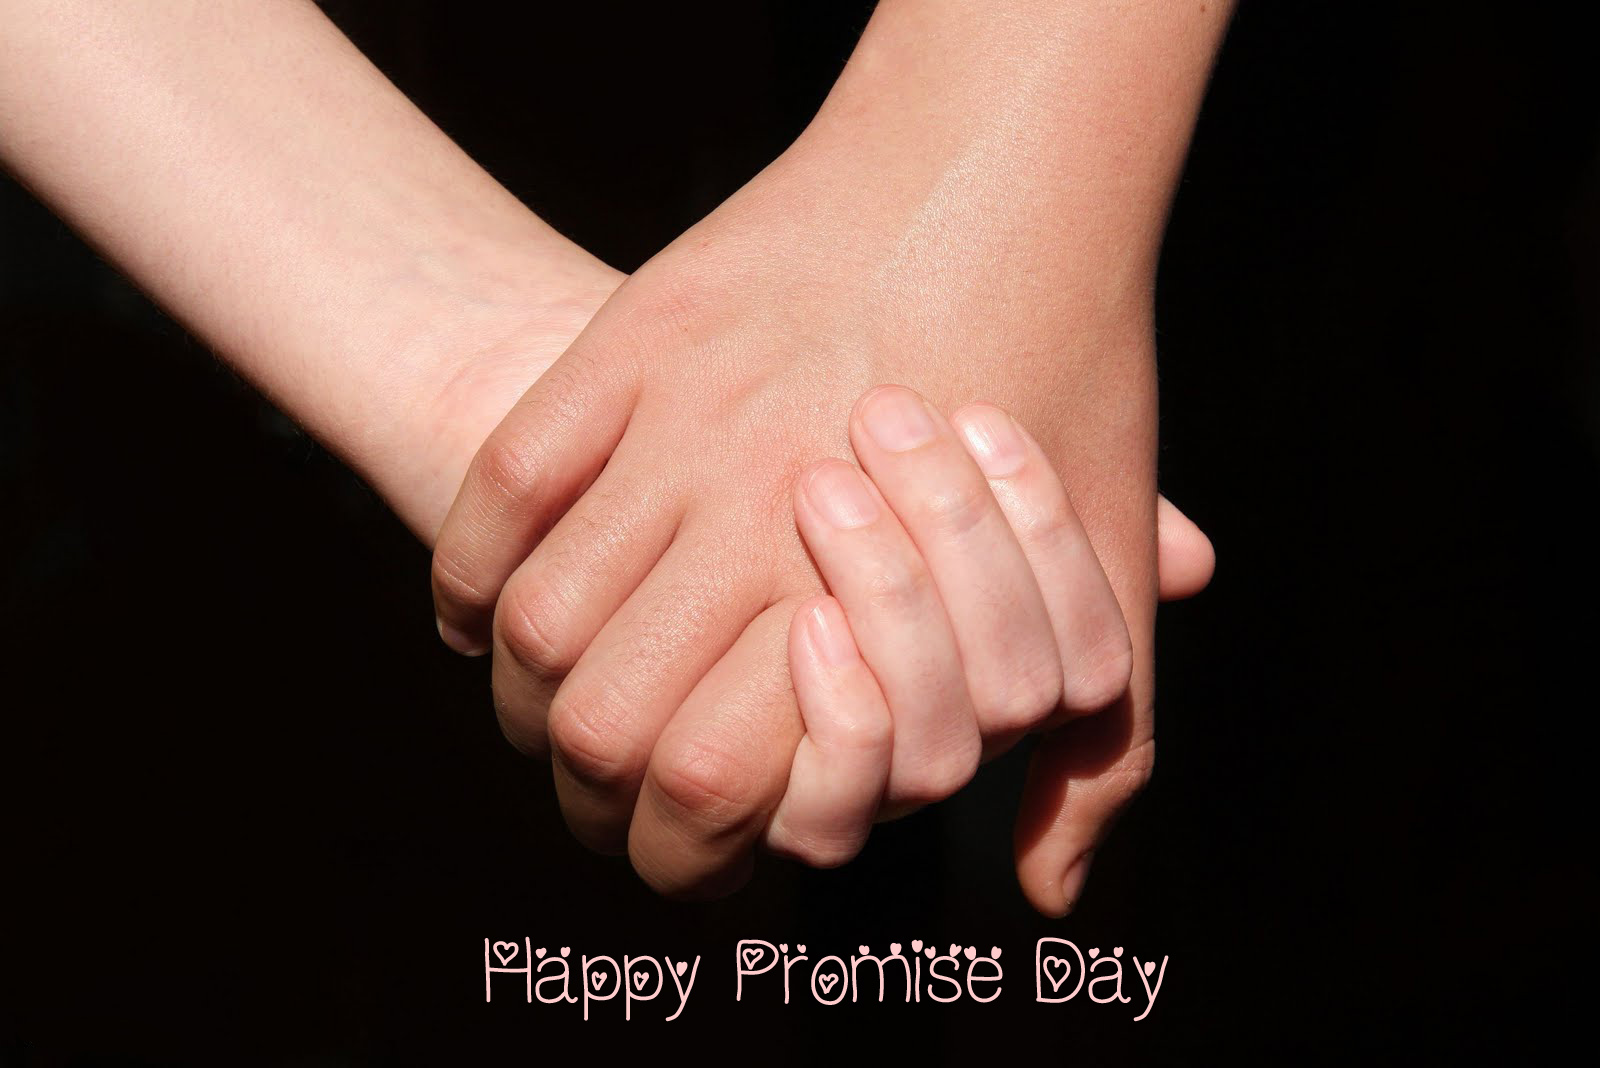 Free download Happy Promise Day Images Pics Photos Wallpapers ...